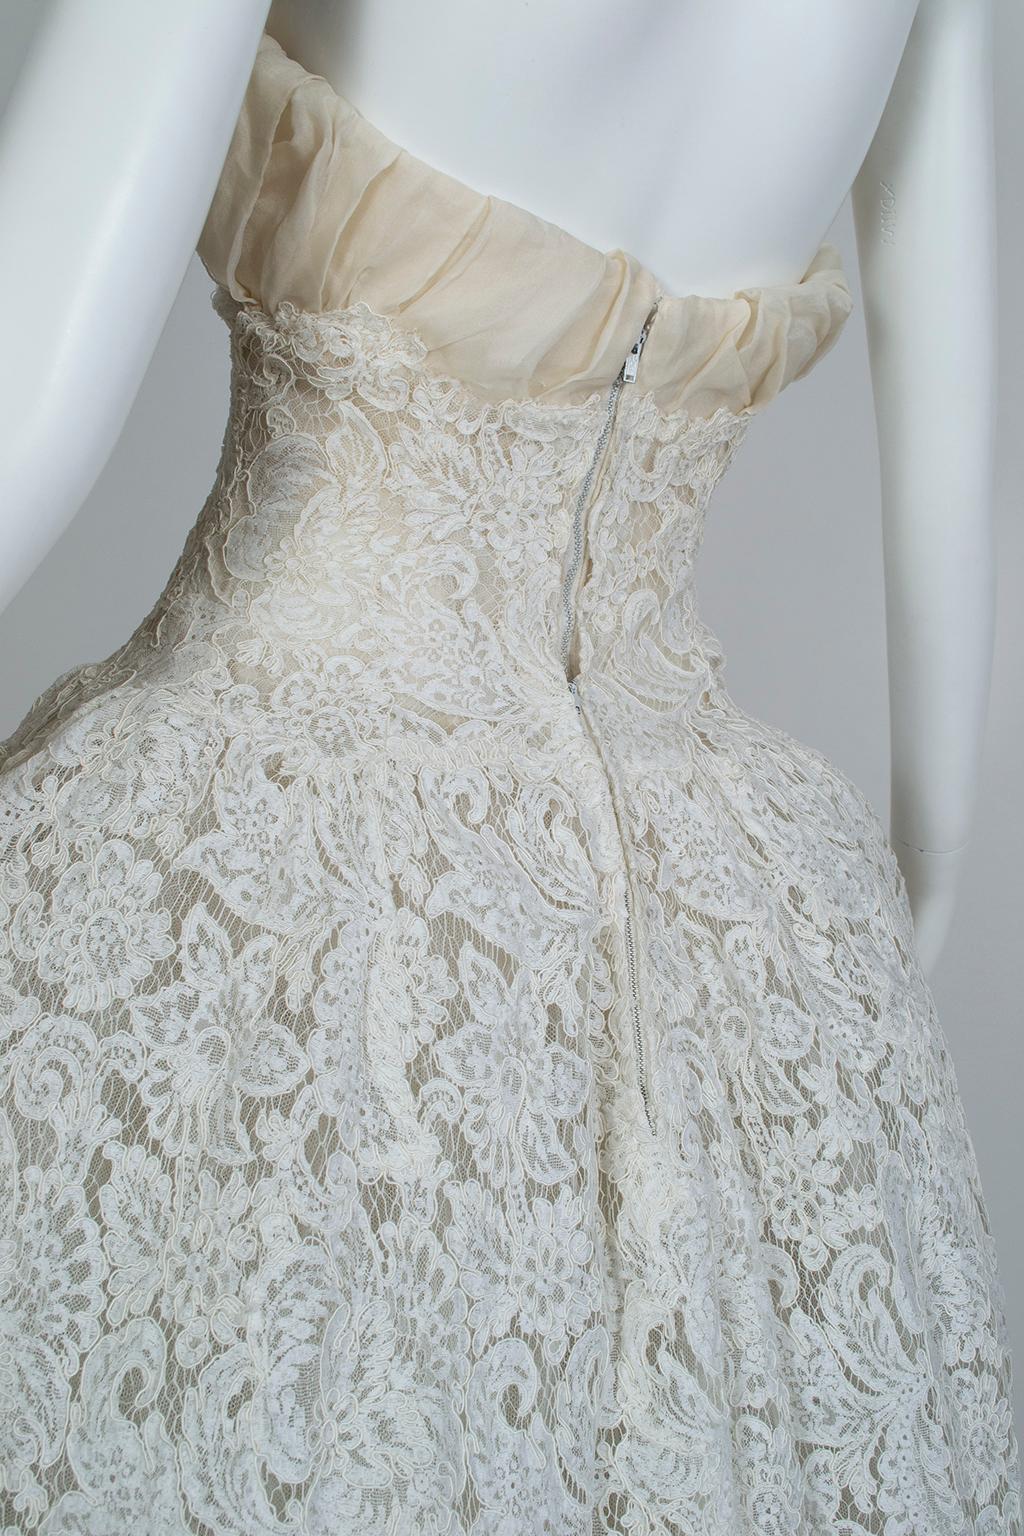 Strapless Ivory Guipure Lace Corseted Robe Française Wedding Dress - XS, 1950s 6